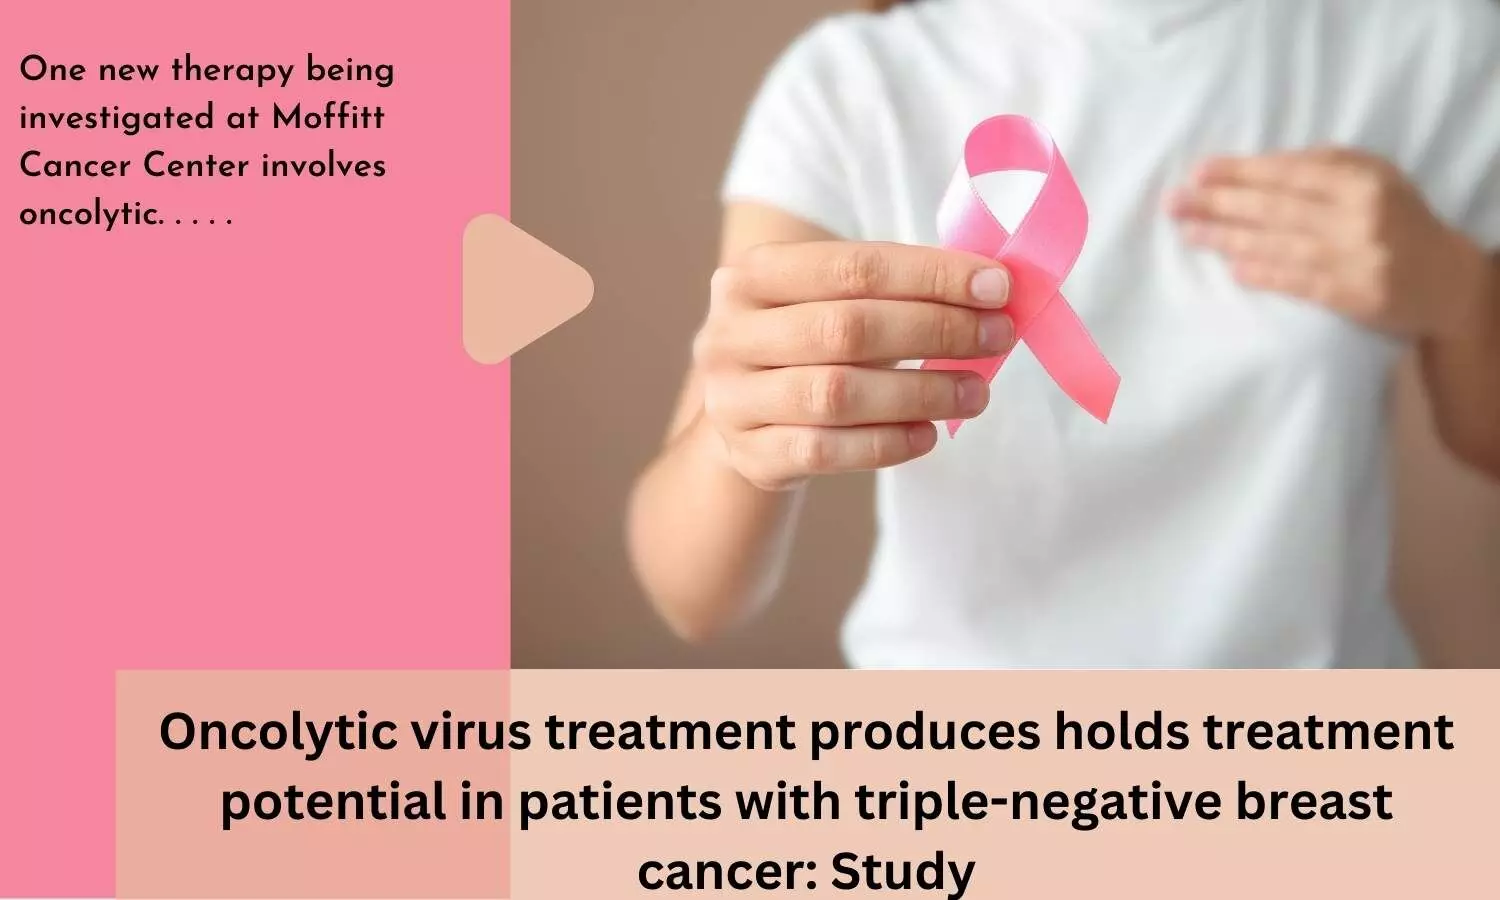 Oncolytic virus treatment produces holds treatment potential in patients with triple-negative breast cancer: Study